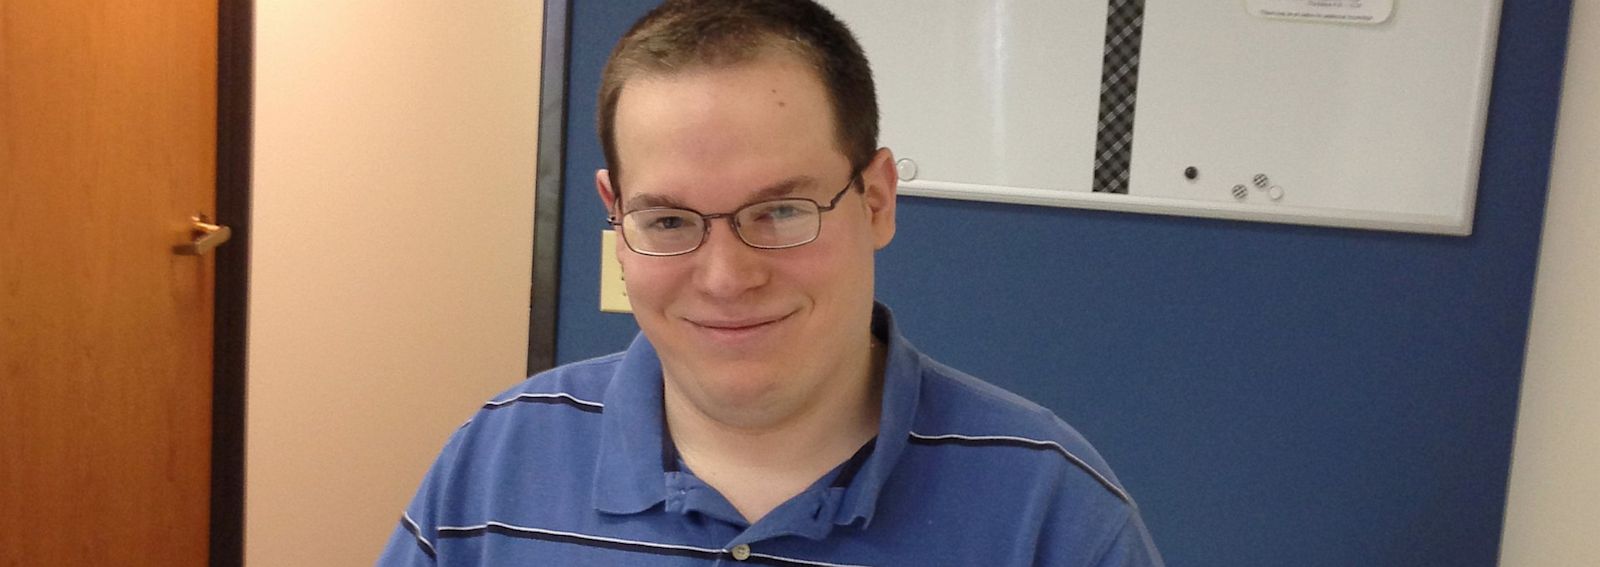 PHOTO: Autism made it hard for Phillip Griffin, 22, to find a job, but now he works at a software company in Illinois.